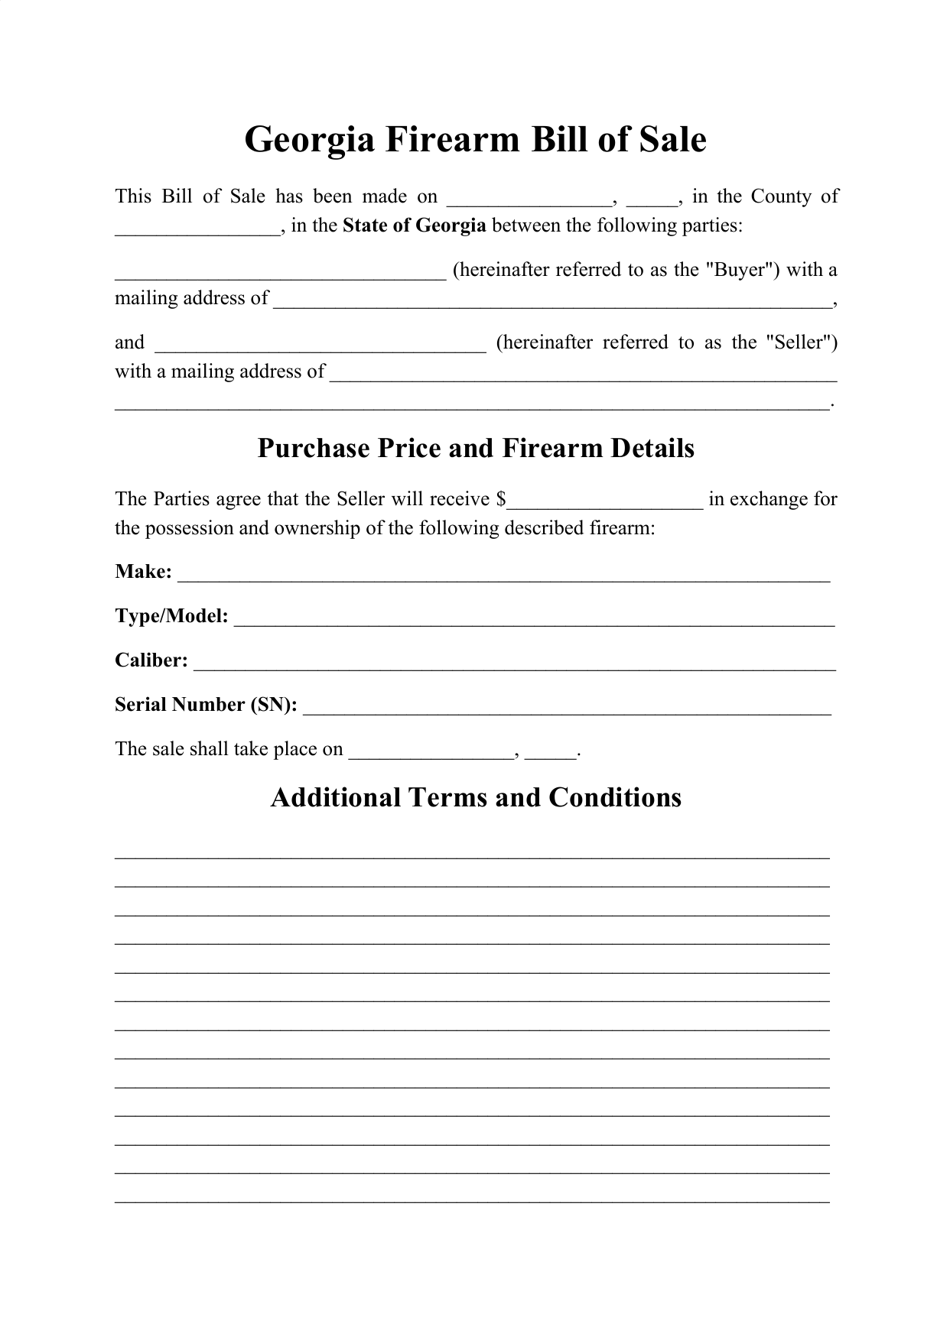 Firearm Bill of Sale Form - Georgia (United States), Page 1